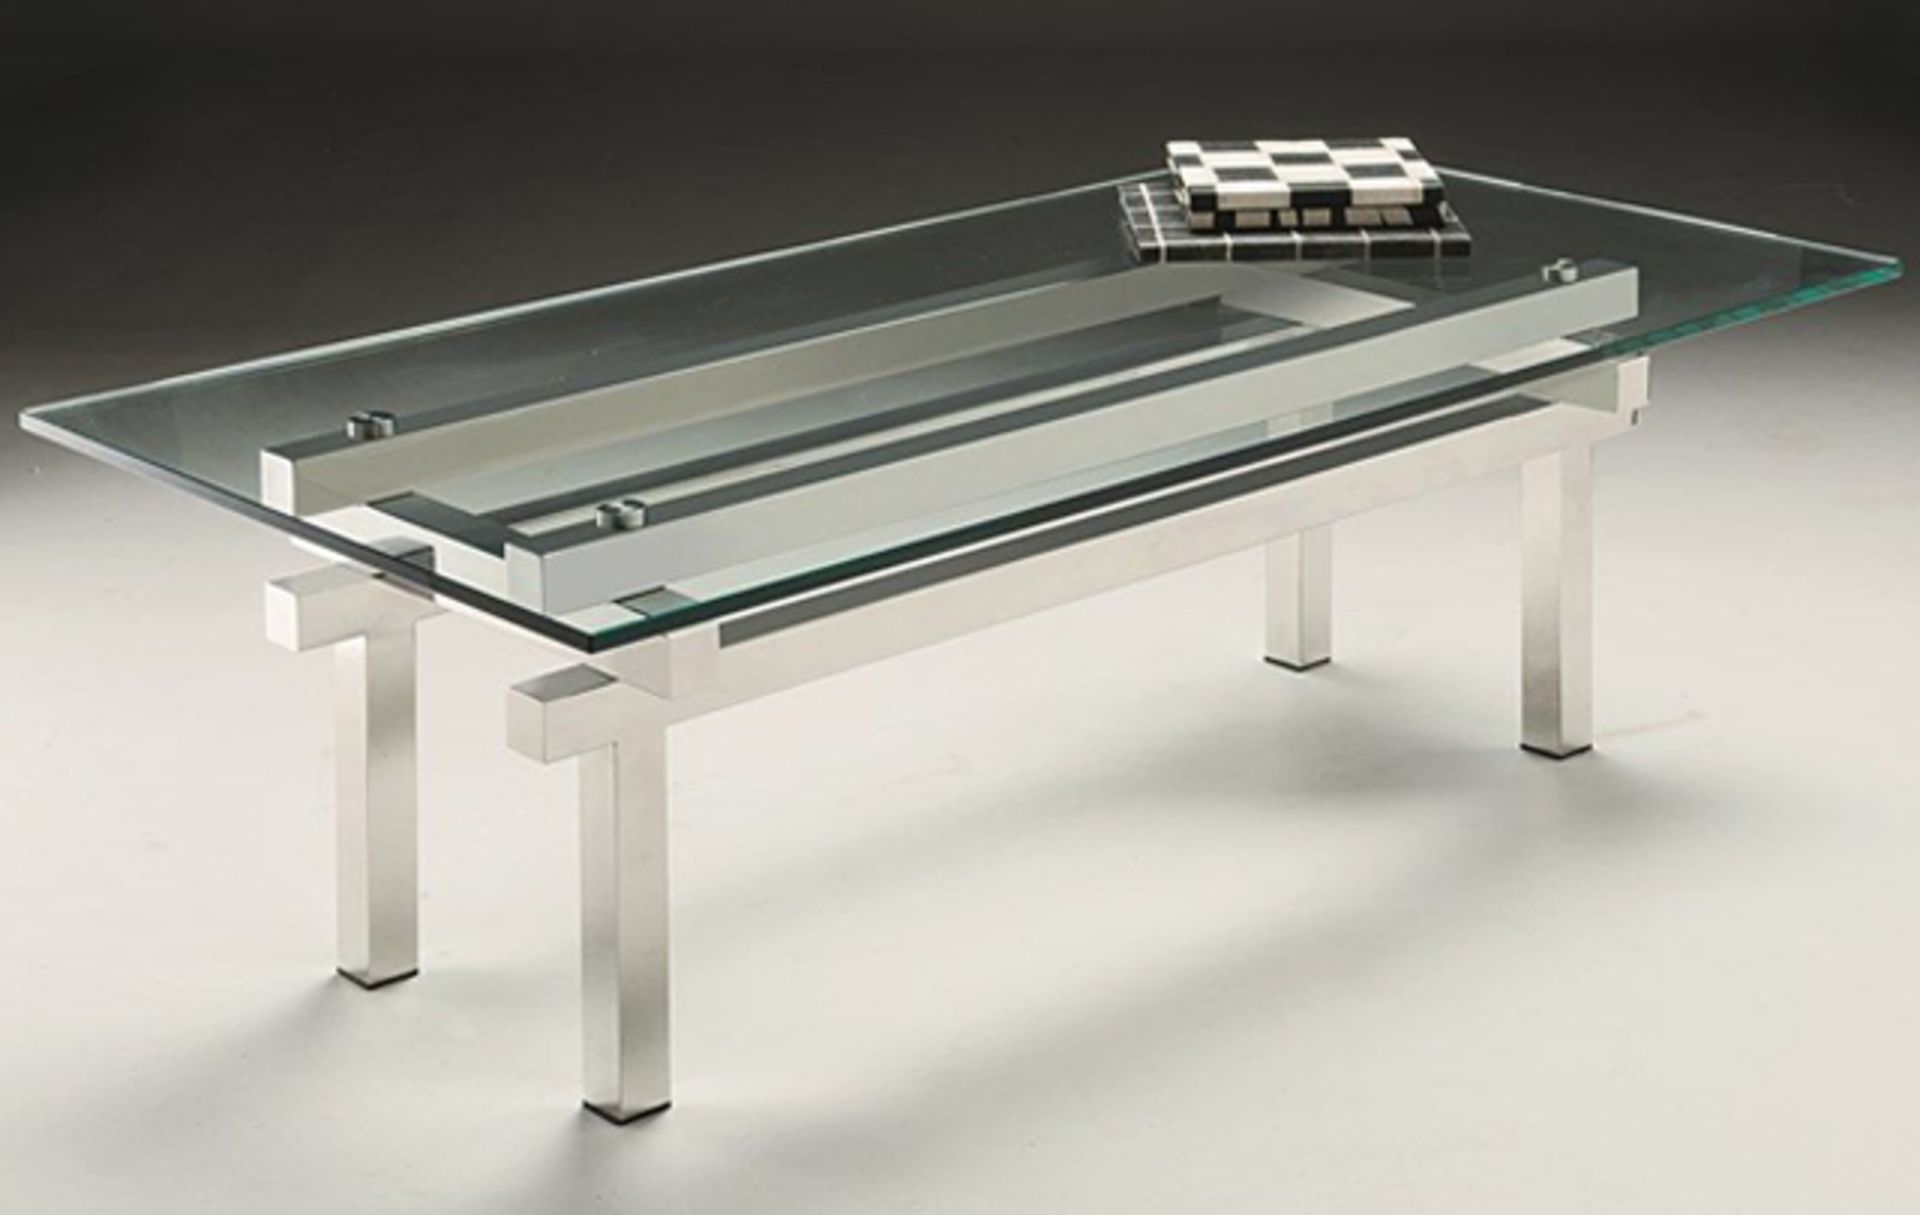 1 x Chelsom Tier Coffee Table - CL081 - Layered Stainless Steel Bars Supporting Clear Tempered Glass